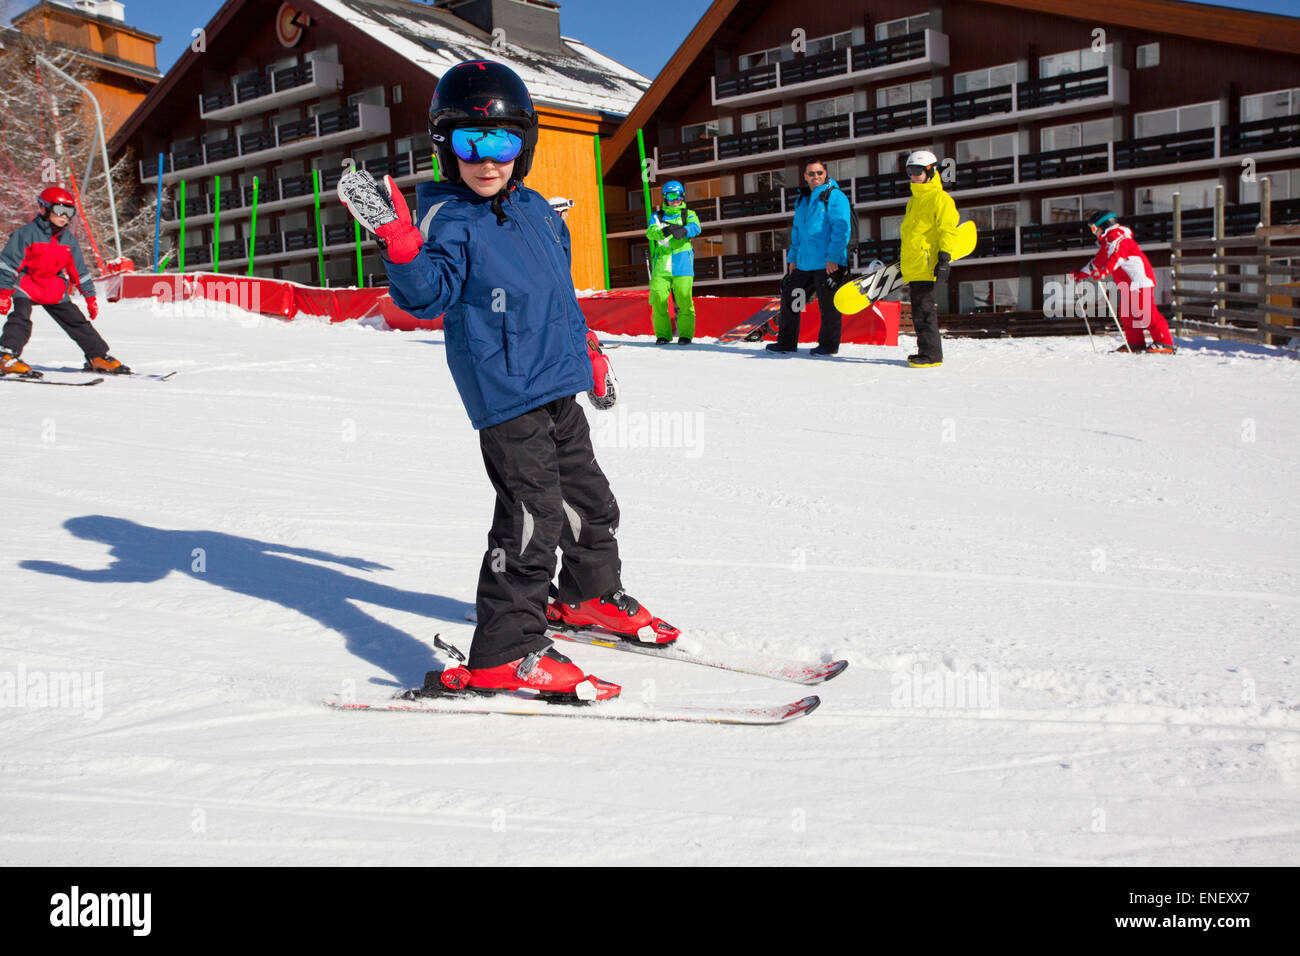 Young boy learning to ski in front of holiday chalets Stock Photo